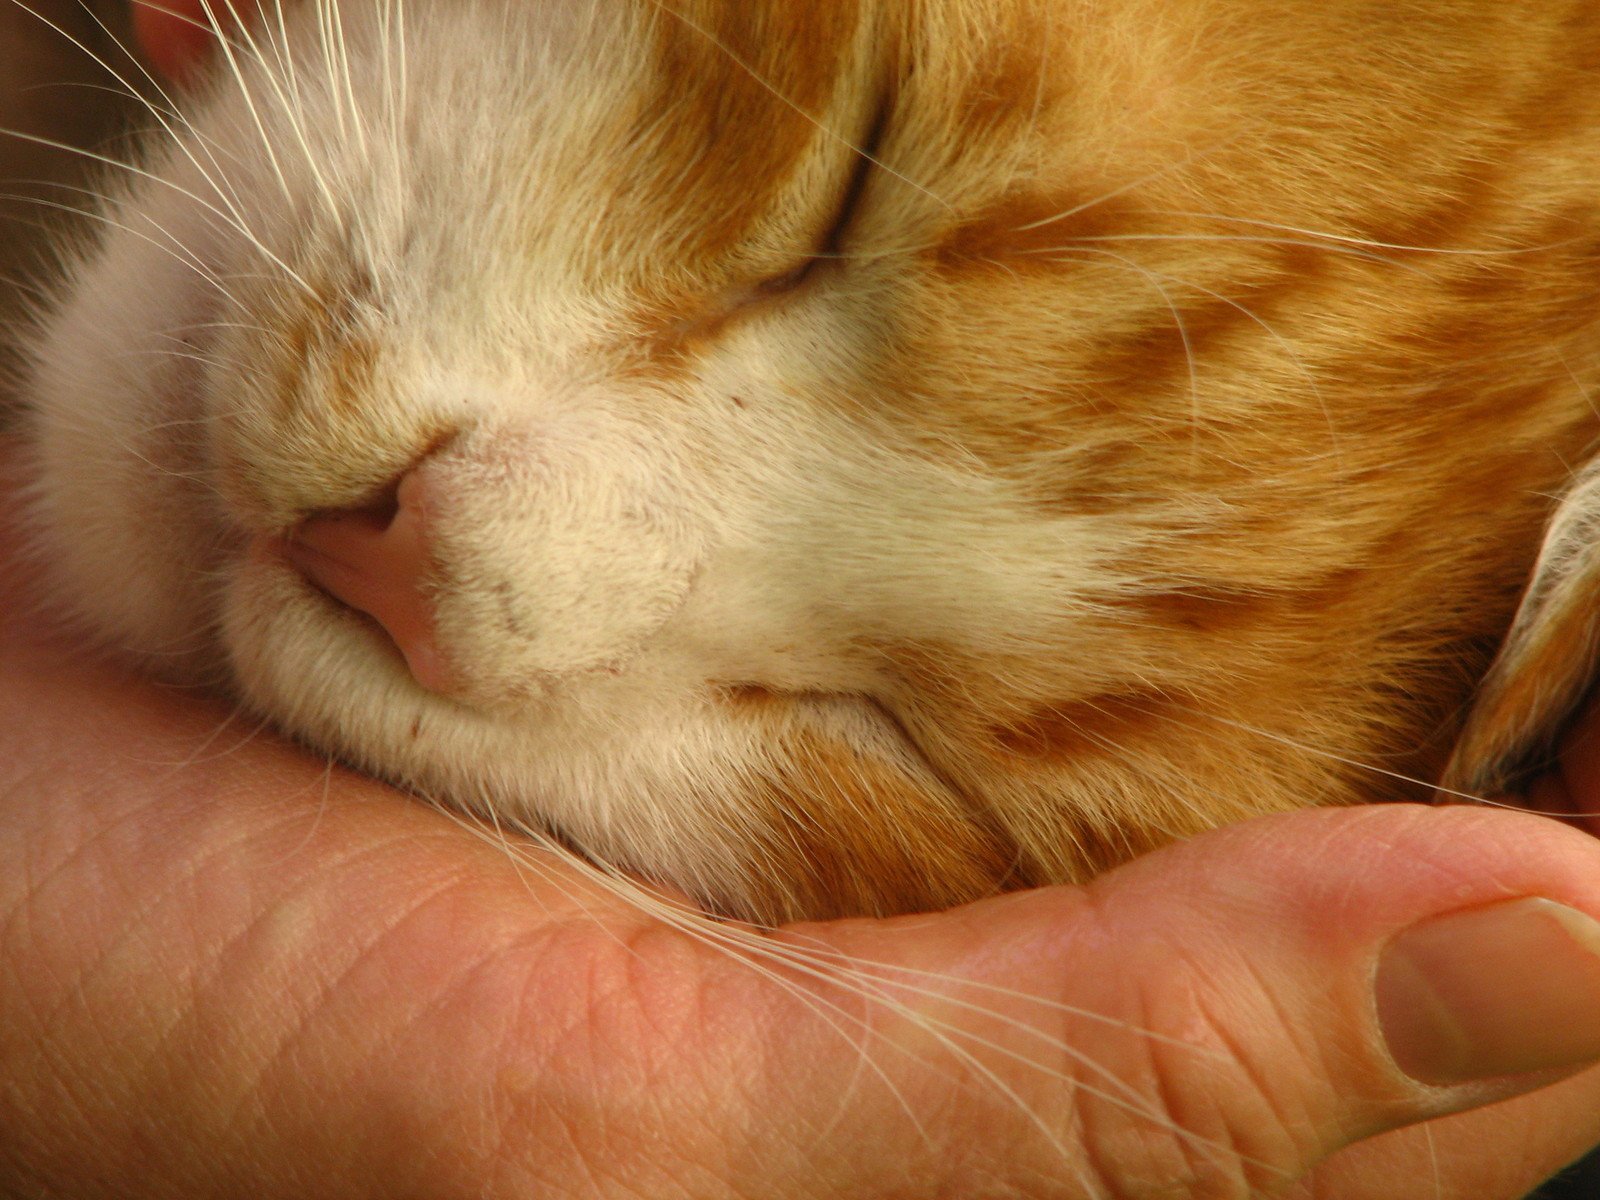 close up s of a cat sleeping in a person's hands